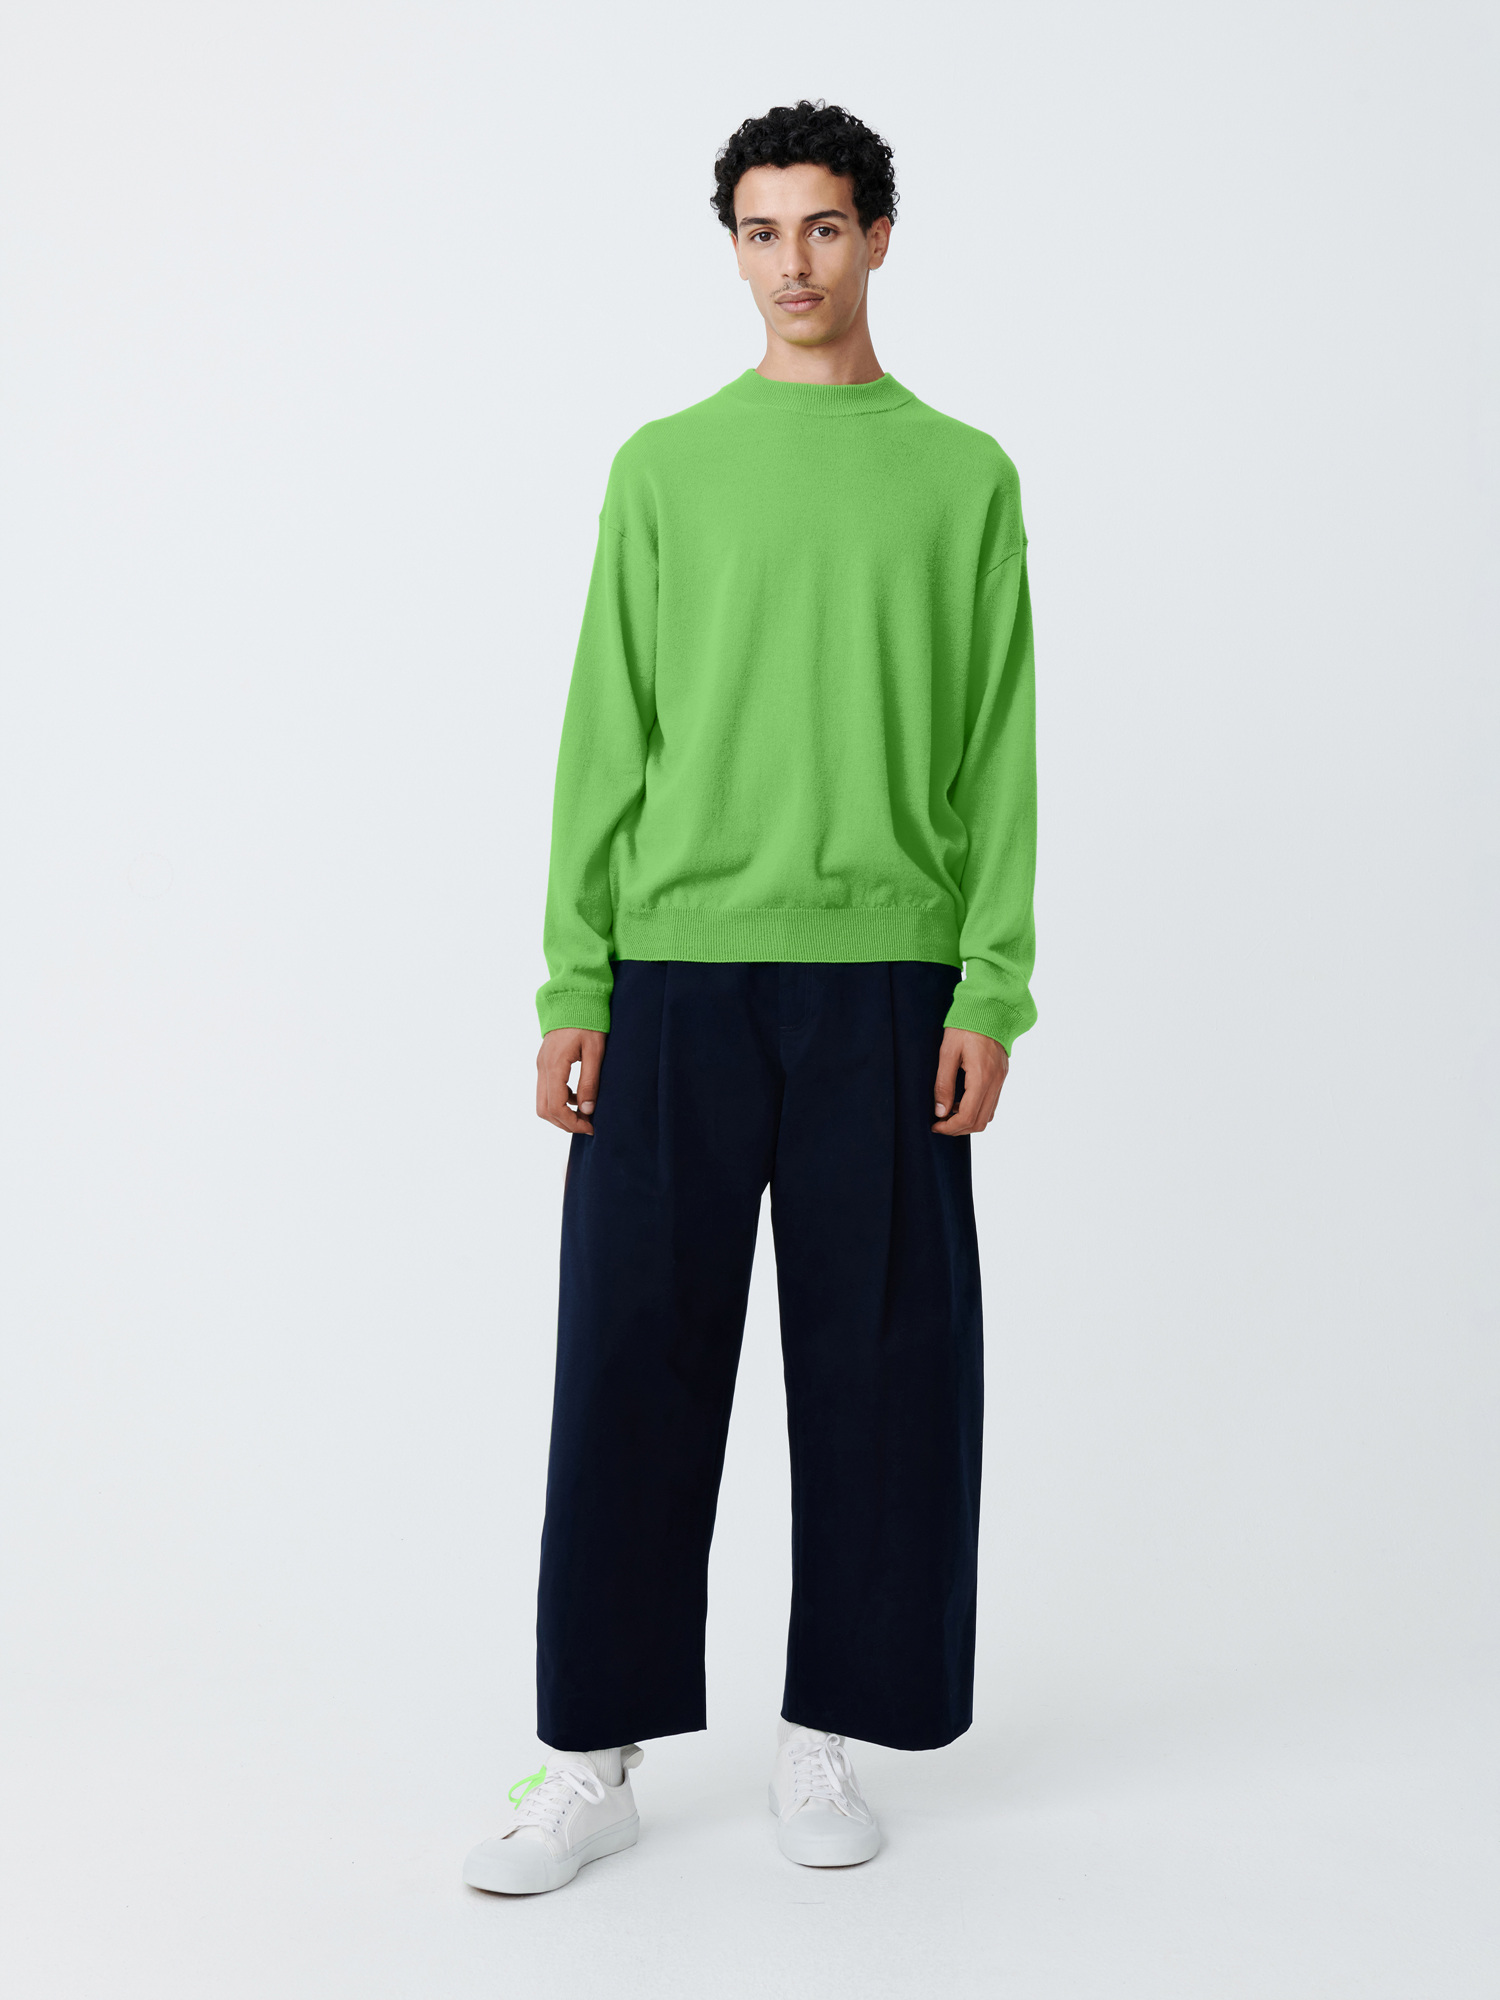 A bright, almost fluorescent, light green makes this Studio Nicholson sweater catch the eye.